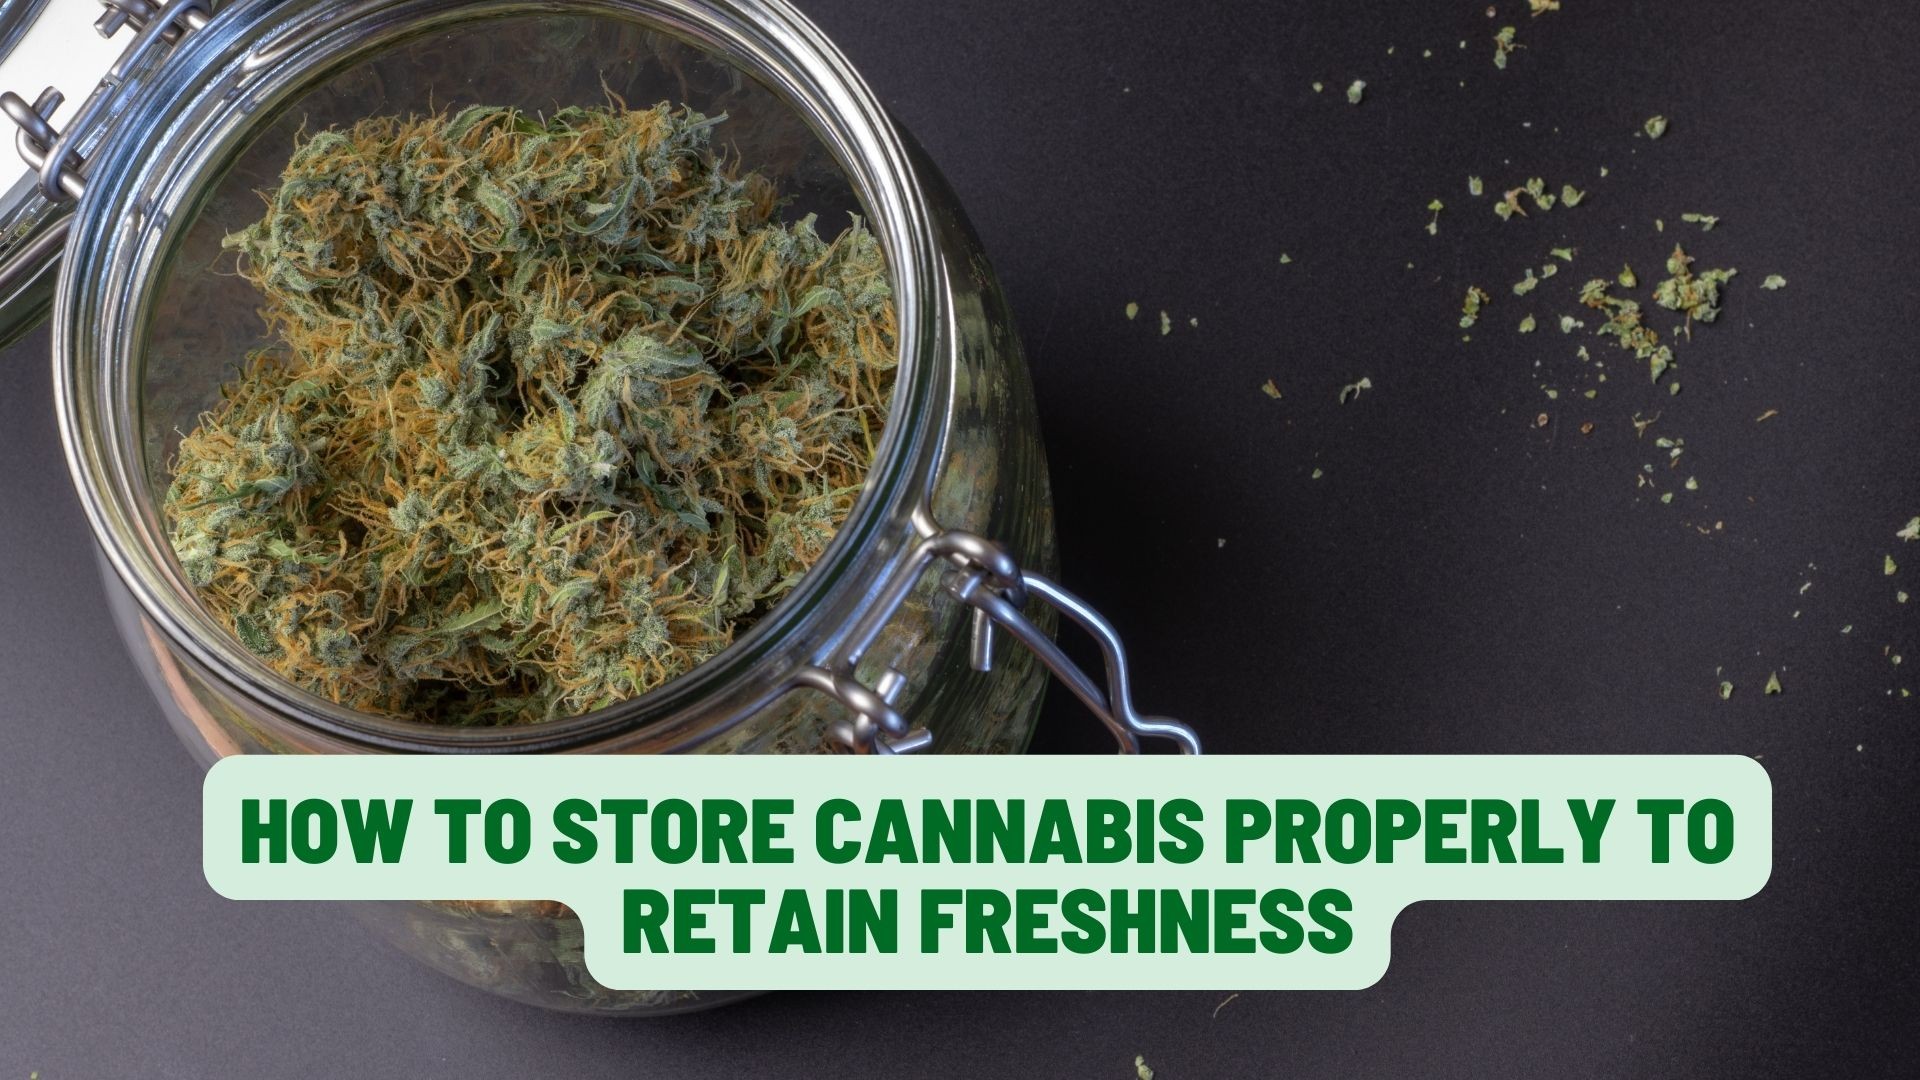 How to Store Cannabis Properly to Retain Freshness